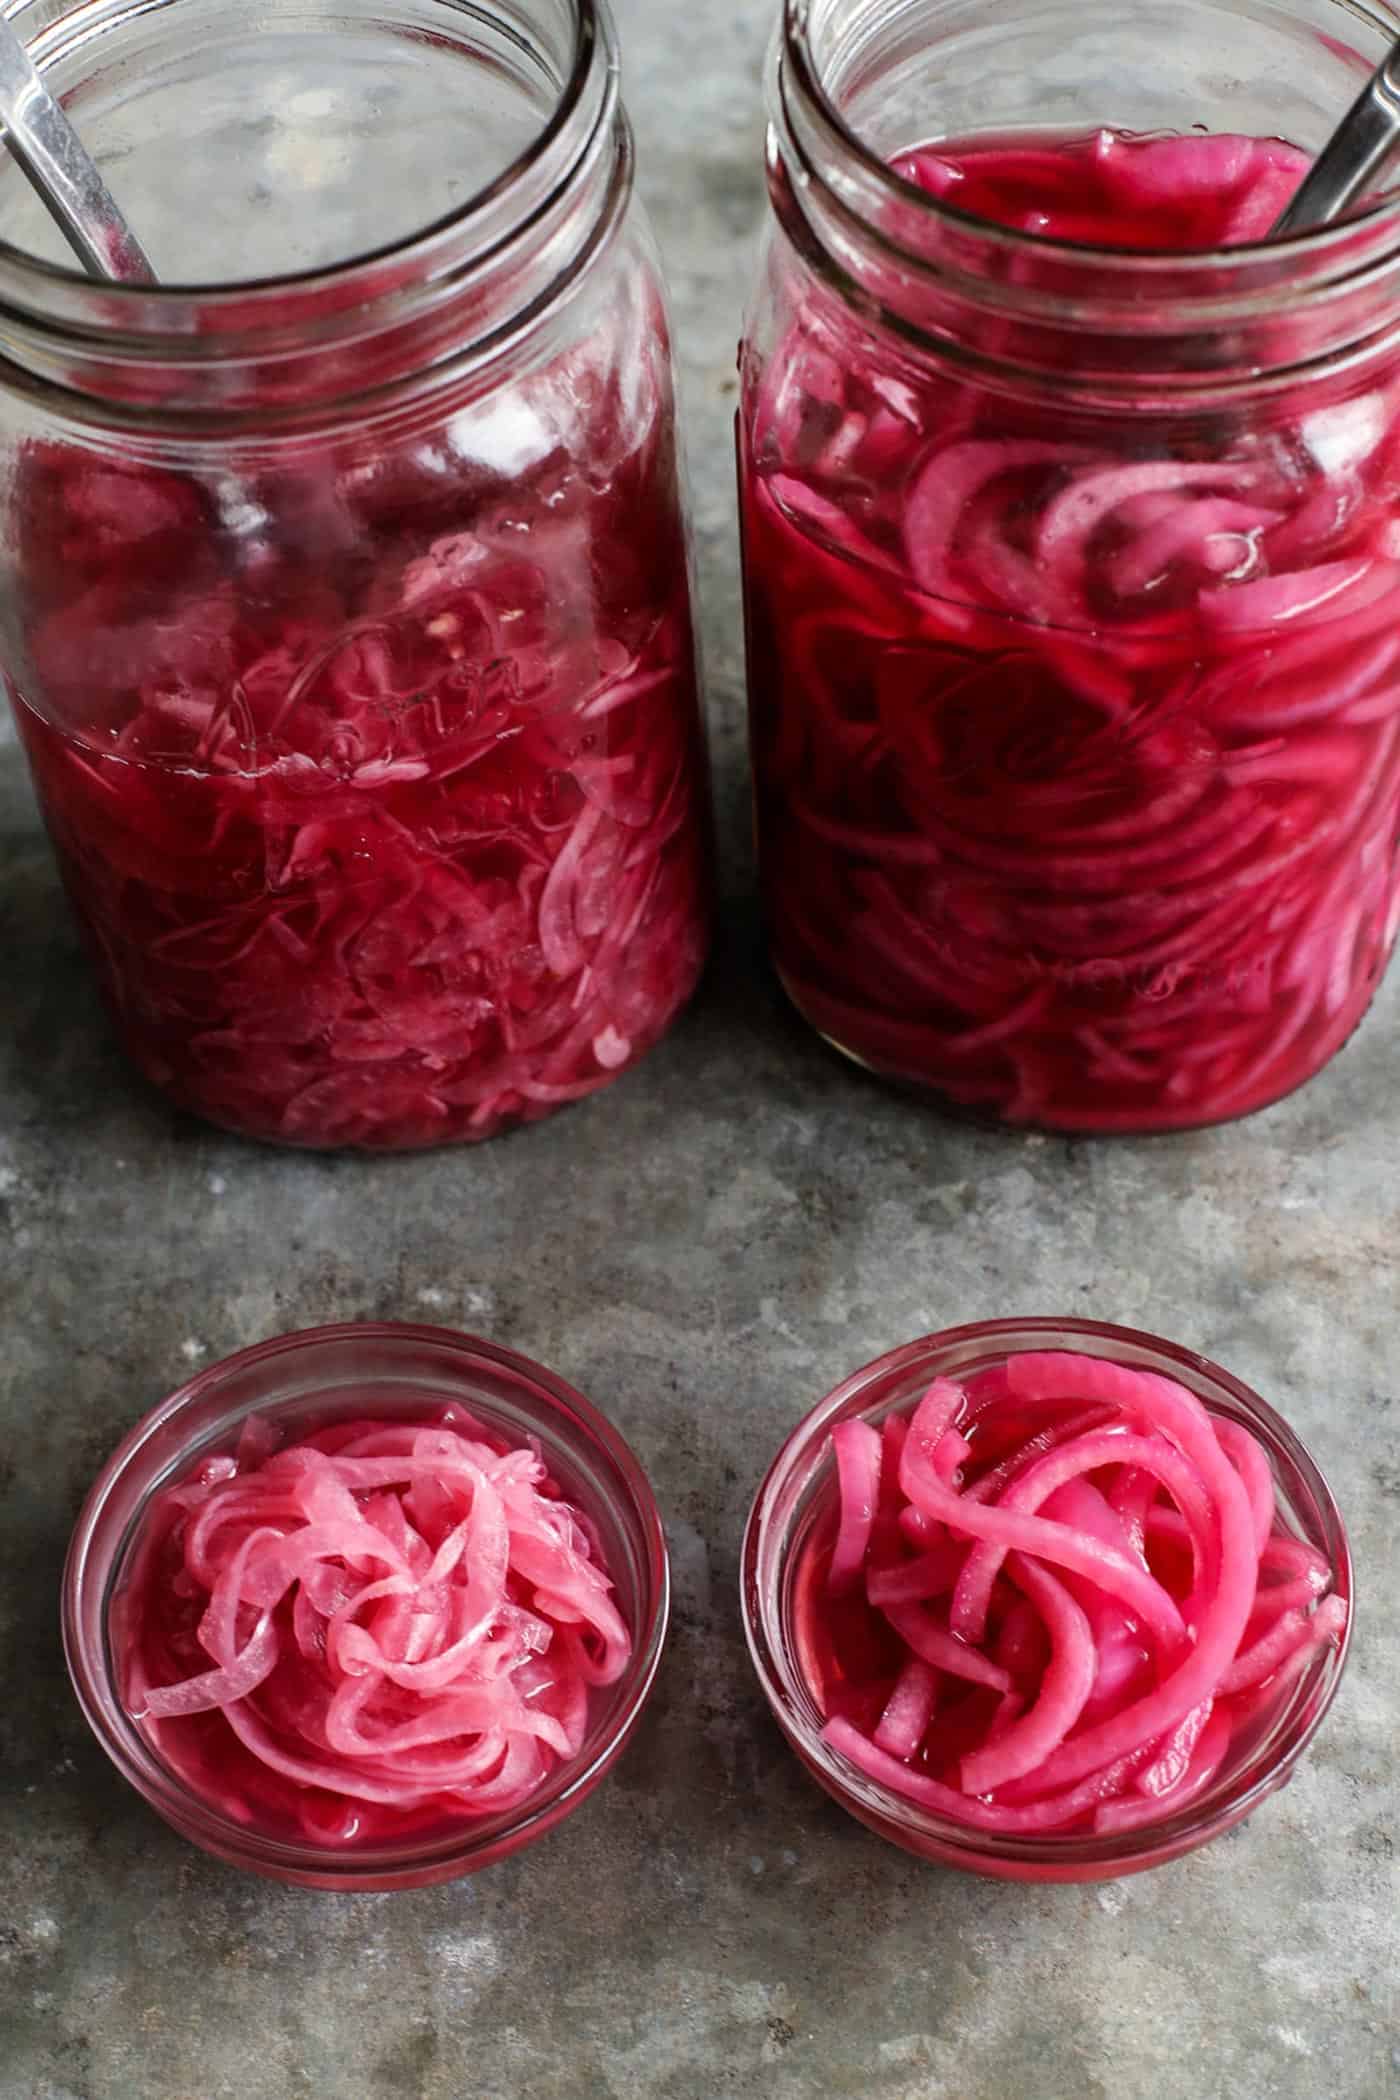 two jars of pickled red onions, 1 jar is thin-cut and the other jar is thick-cut